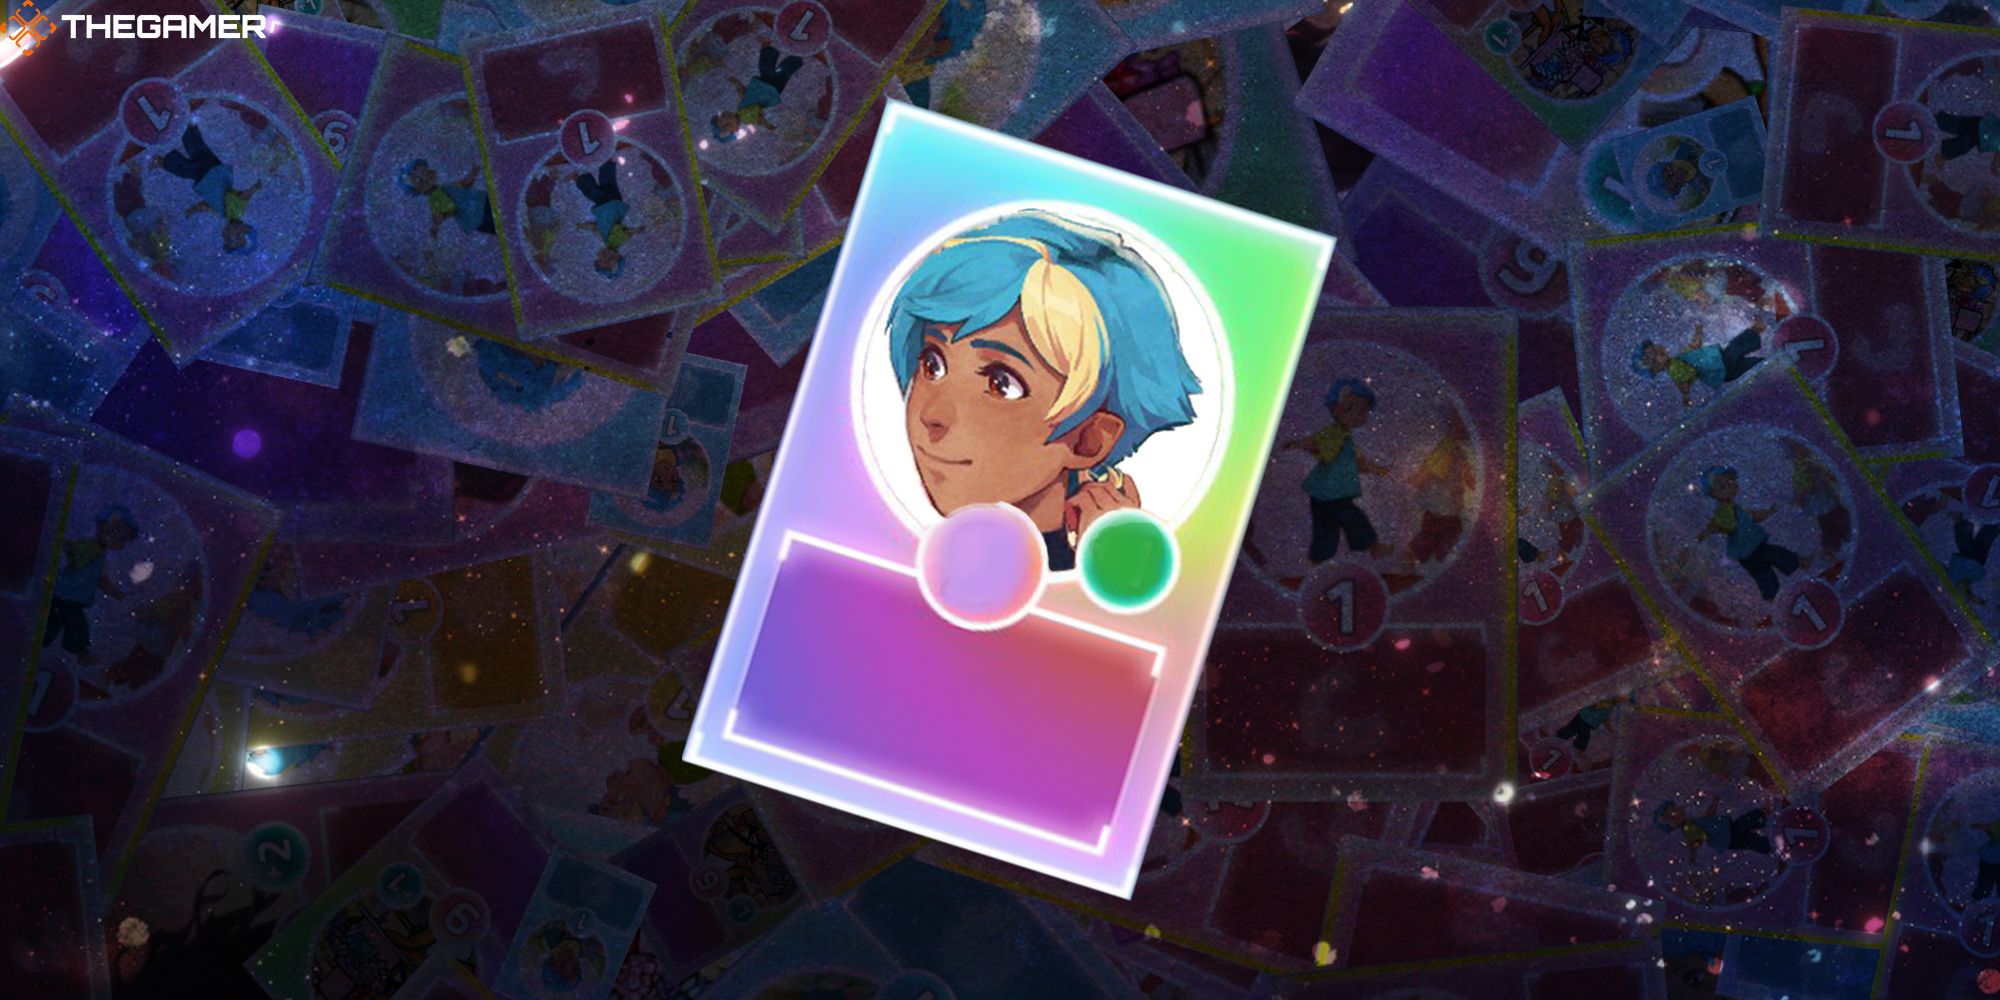 A card with the blue-haired protagonist's face on it floats in a universe of cards from I Was A Teenage Exocolonist.